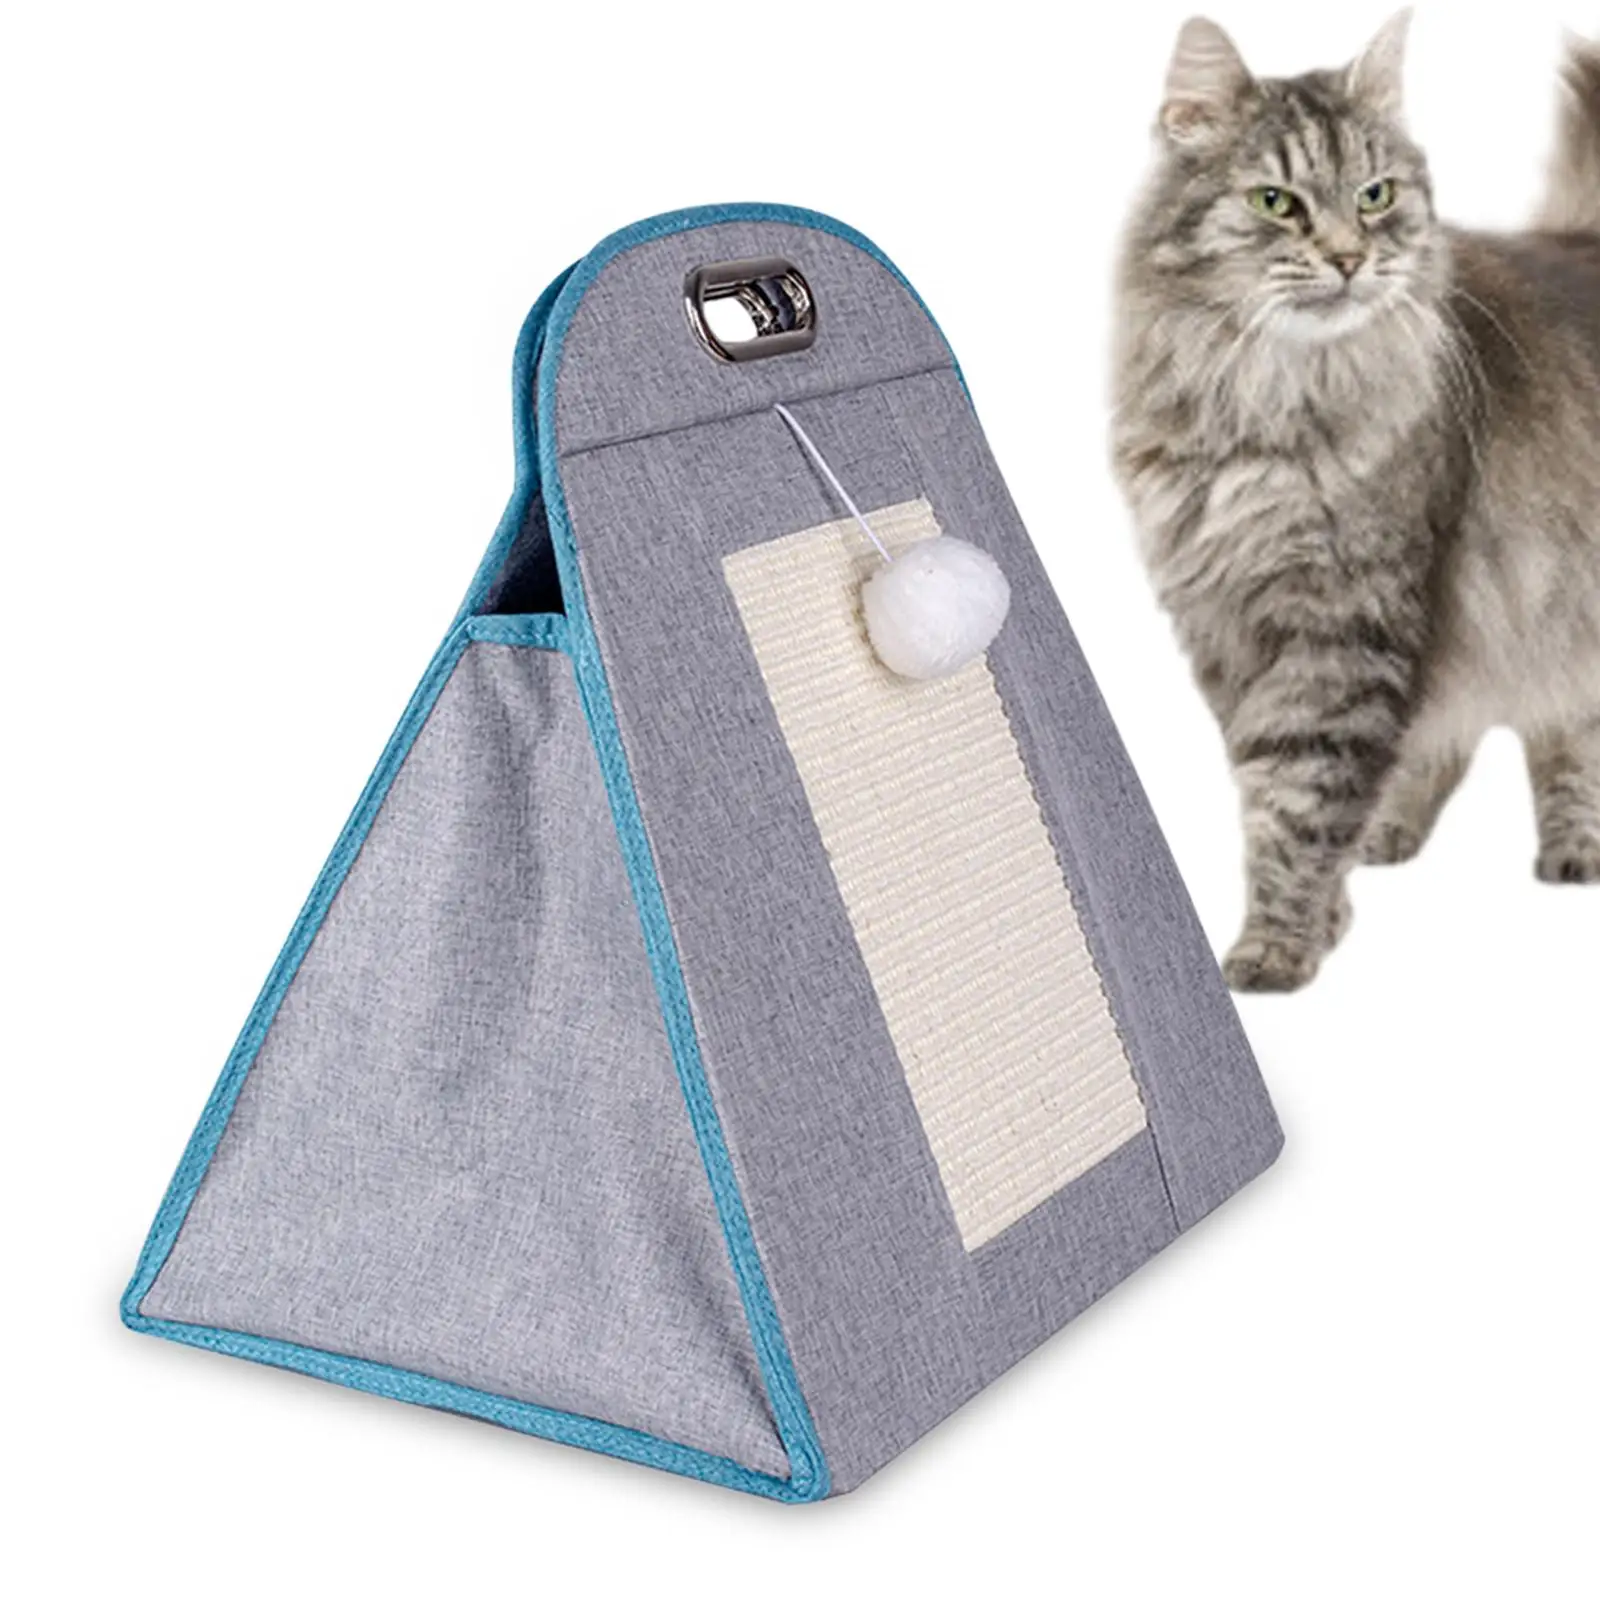 Cat Carrier Bag Collapsible Kitten Carriers Carrying Handbag Pet Carriers for Small to Medium Cats and Small Dogs